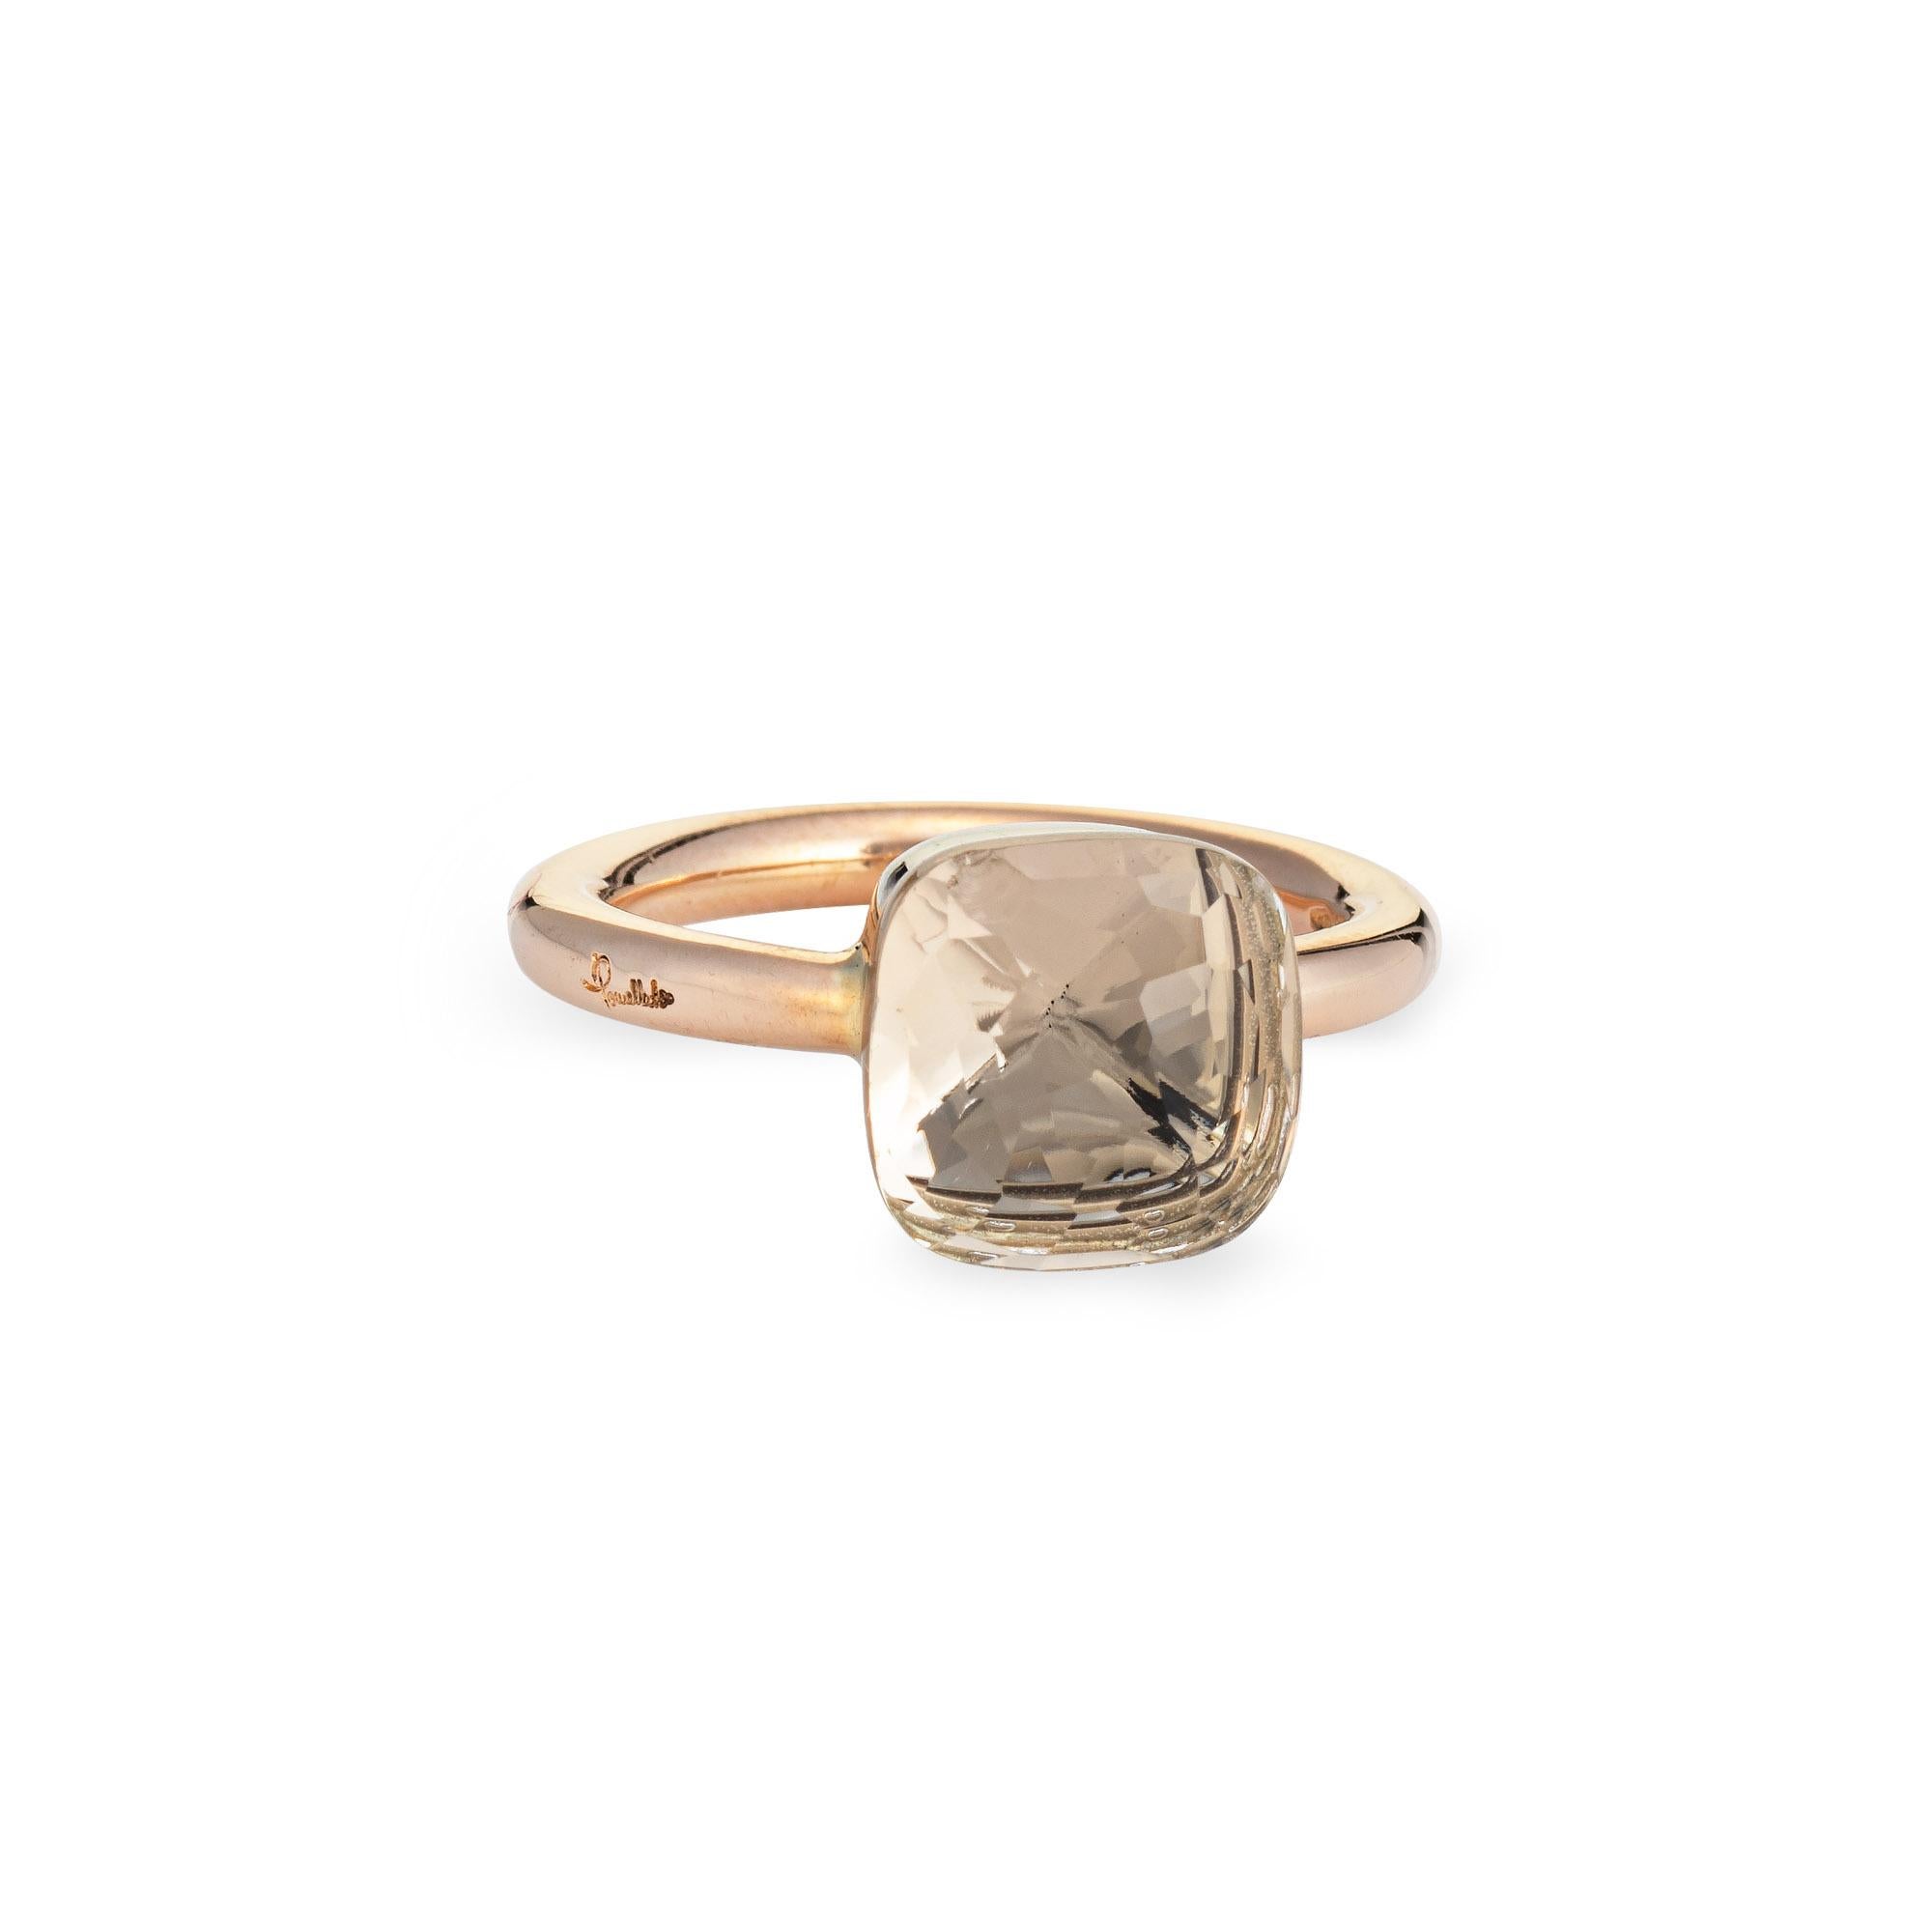 Finely detailed estate Pomellato prasiolite Nudo ring, crafted in 18 karat yellow gold. 

Faceted prasiolite measures 10.5mm x 10.5mm. Note: slight chip to the stone visible under a 10x loupe. The prasiolite stone is a light sea green color (the